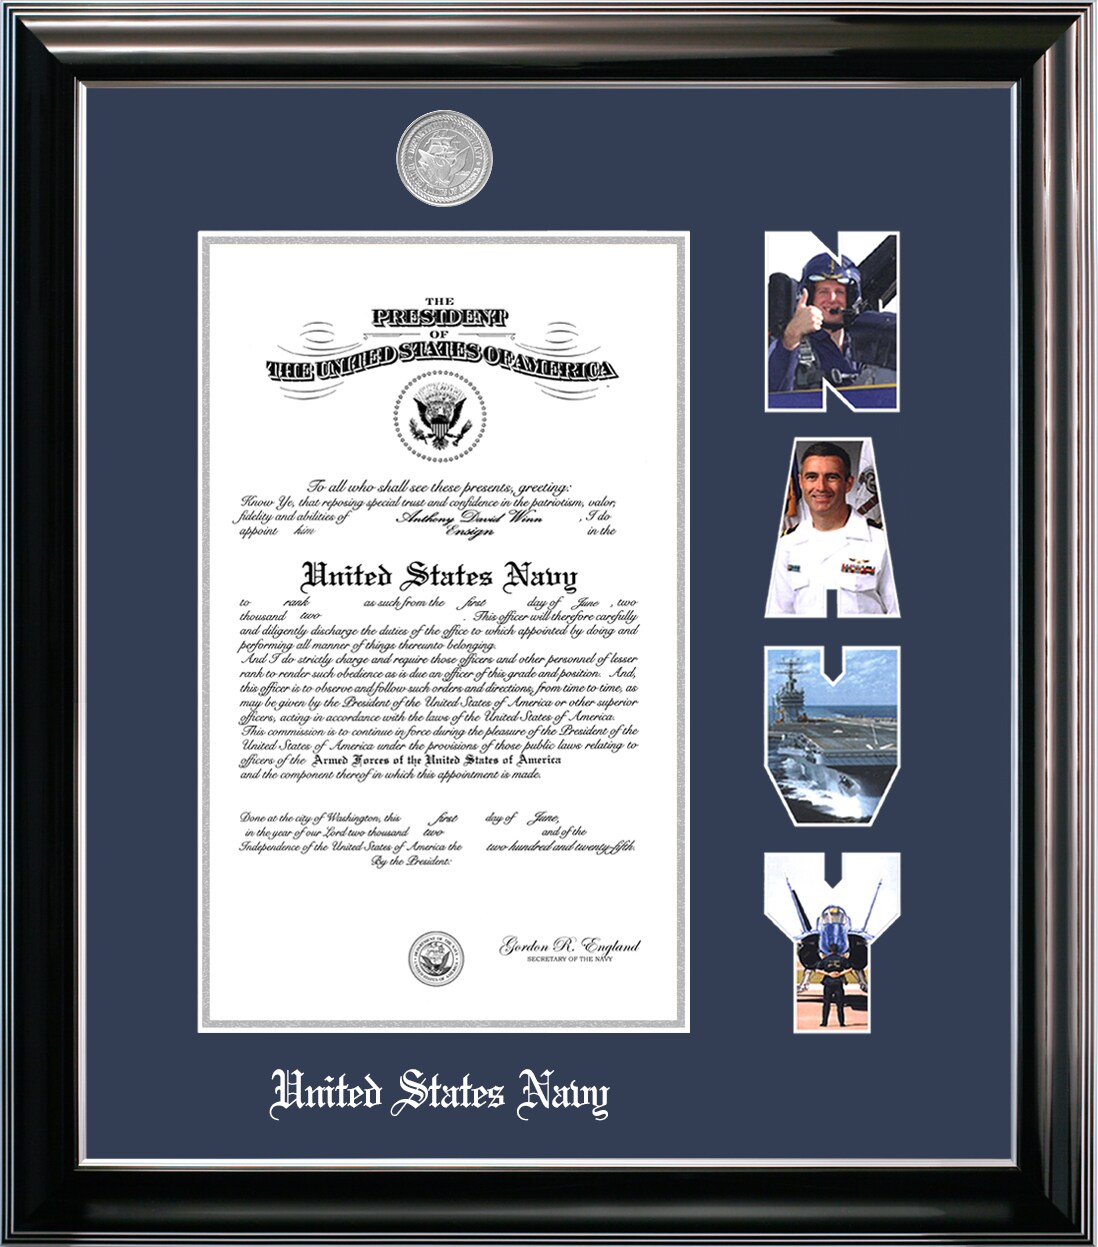 Patriot Frames Navy 10x14 Certificate Classic Black Frame with Silver Medallion